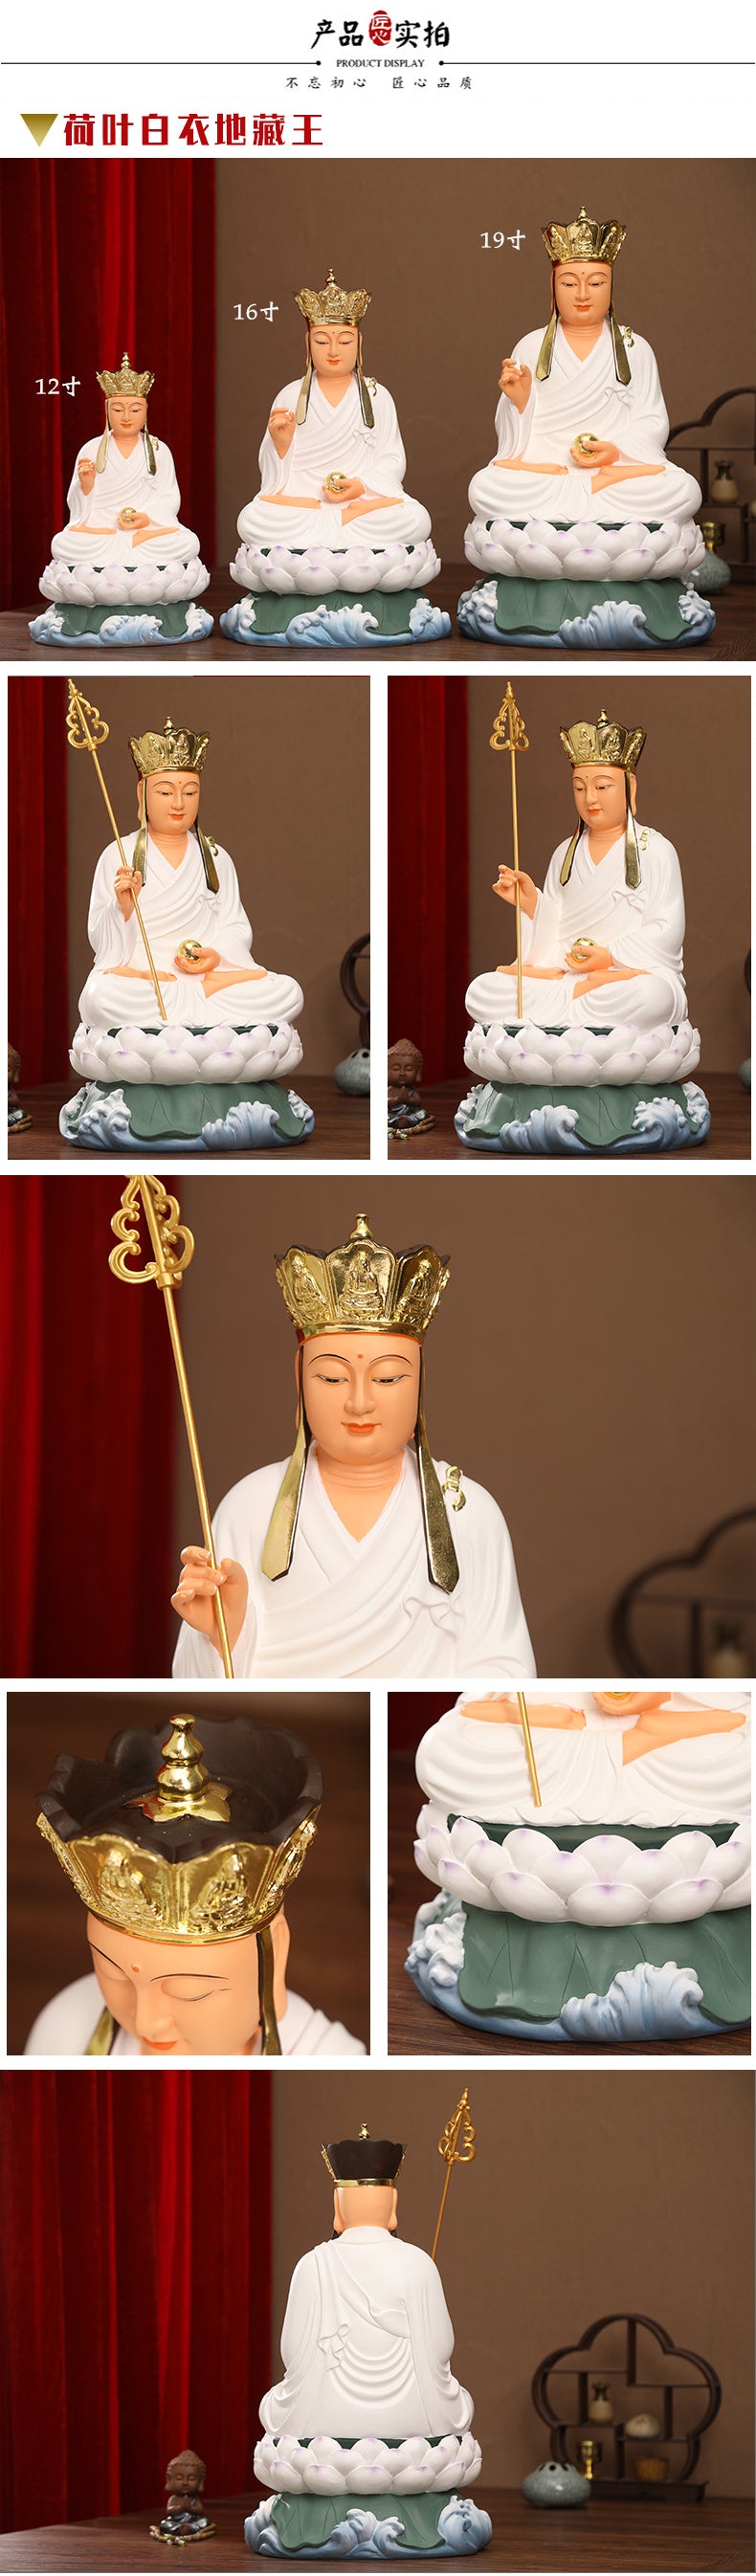 White Clothes Ksitigarbha Bodhisattva Buddha Statue for Sale, Lotus Leaf Resin Material, Offerings Product Detail Statement-4